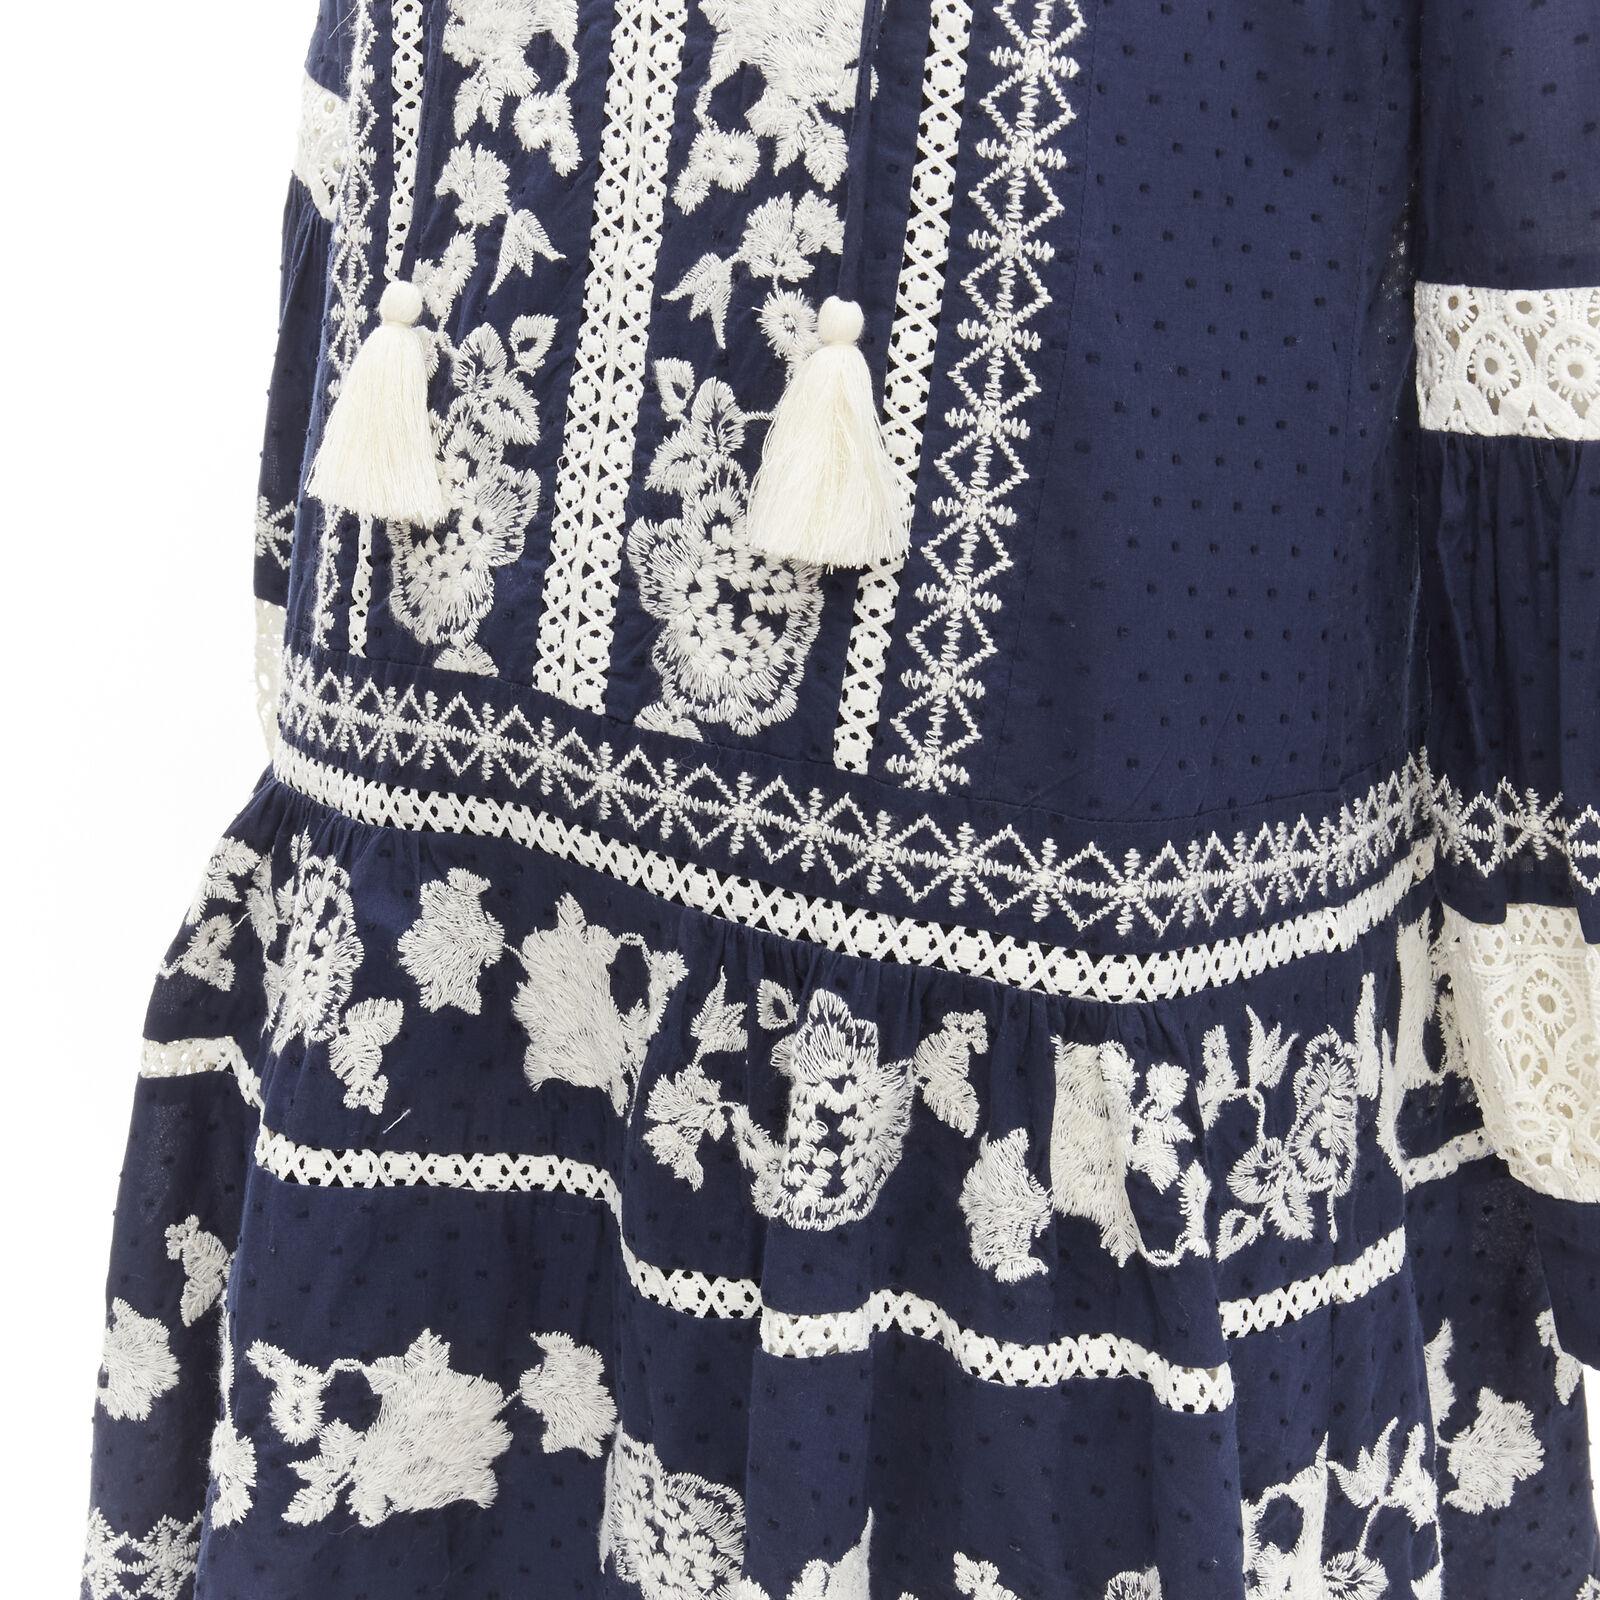 TORY BURCH navy blue white floral embroidery flared skirt boho dress S
Reference: KNLM/A00172
Brand: Tory Burch
Material: Cotton
Color: Navy, White
Pattern: Floral
Closure: Drawstring
Lining: Polyester
Extra Details: Comes with slip lining.
Made in: